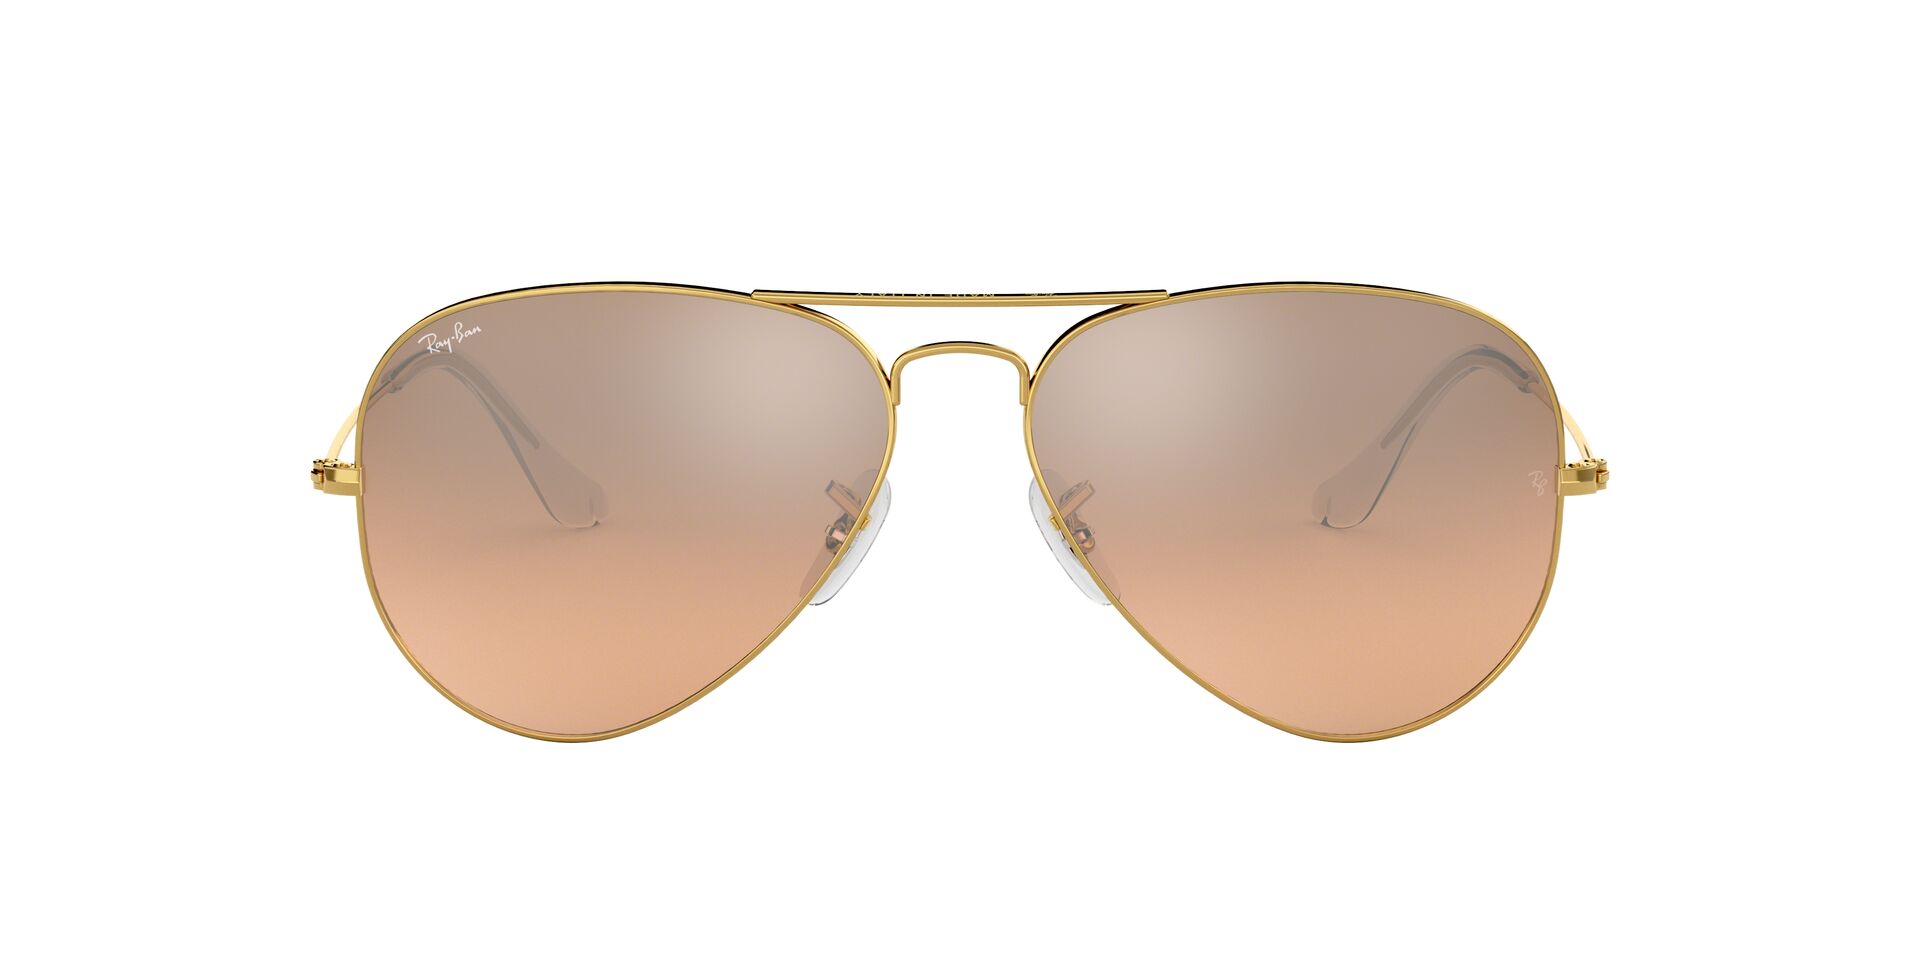 http://www.masvision.mx/cdn/shop/products/Lentes-de-Sol-Ray-Ban-RB3025-Dorado-805289007845_1_90be8dc1-5f65-4224-ad1f-b4480cce806c.jpg?v=1651603872